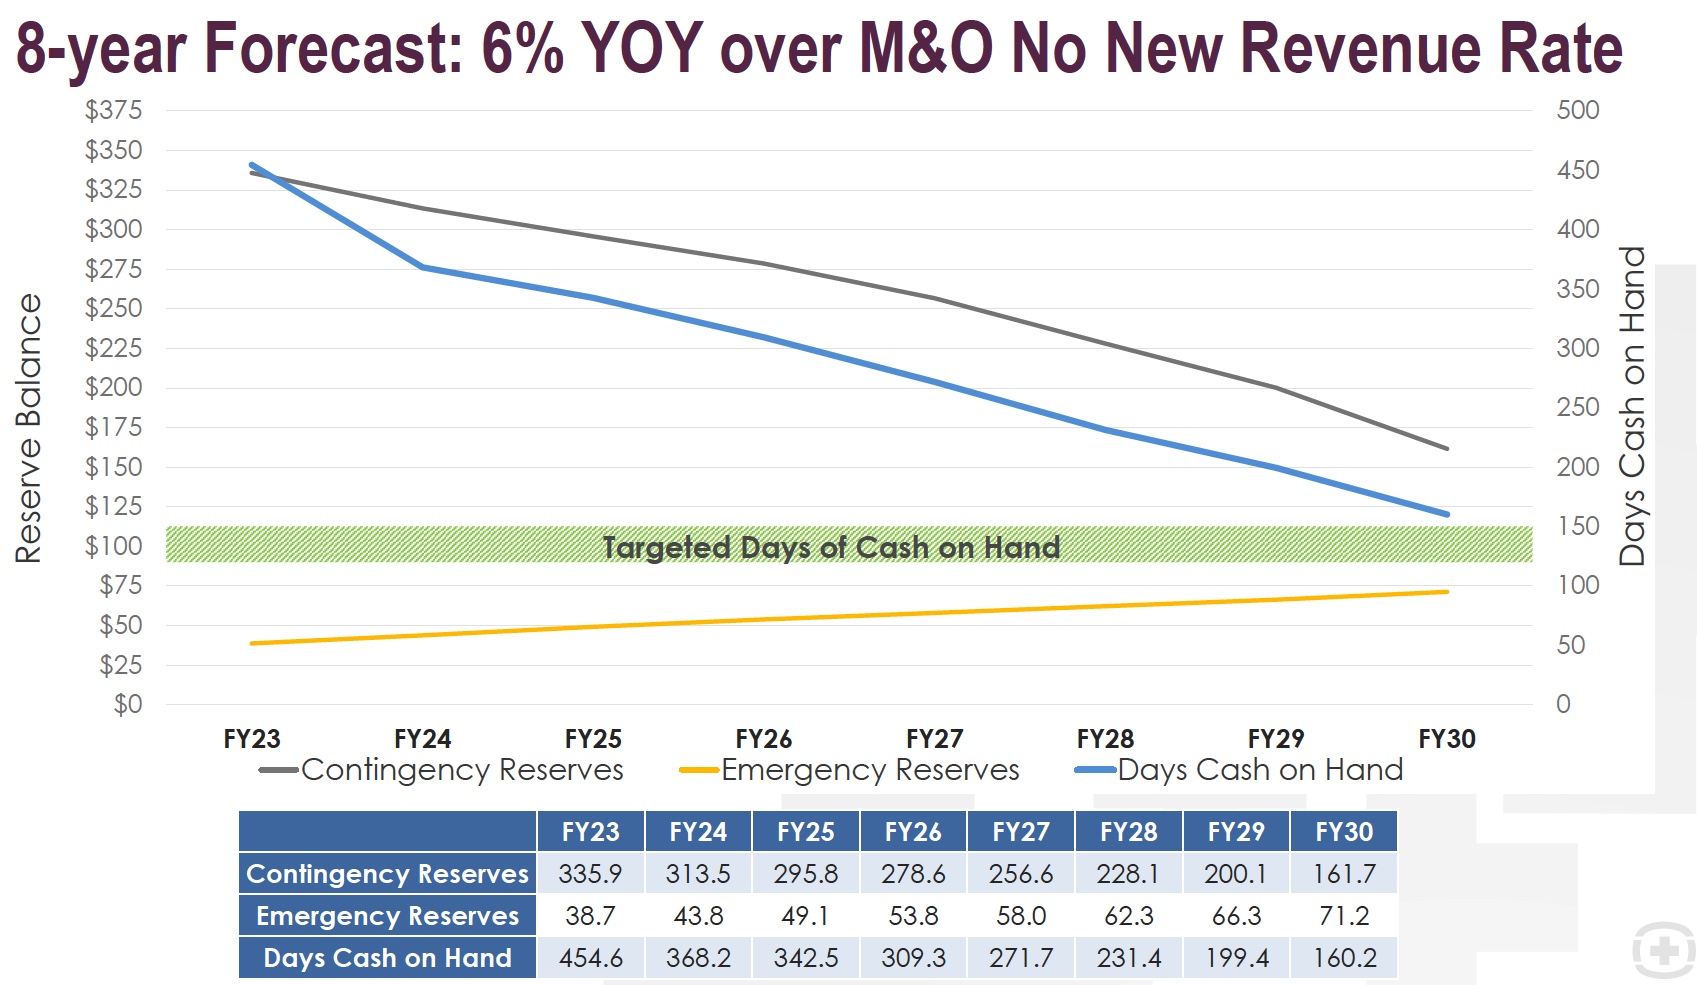 8-year Forecast: 6% YOY over M&O No New Revenue Rate